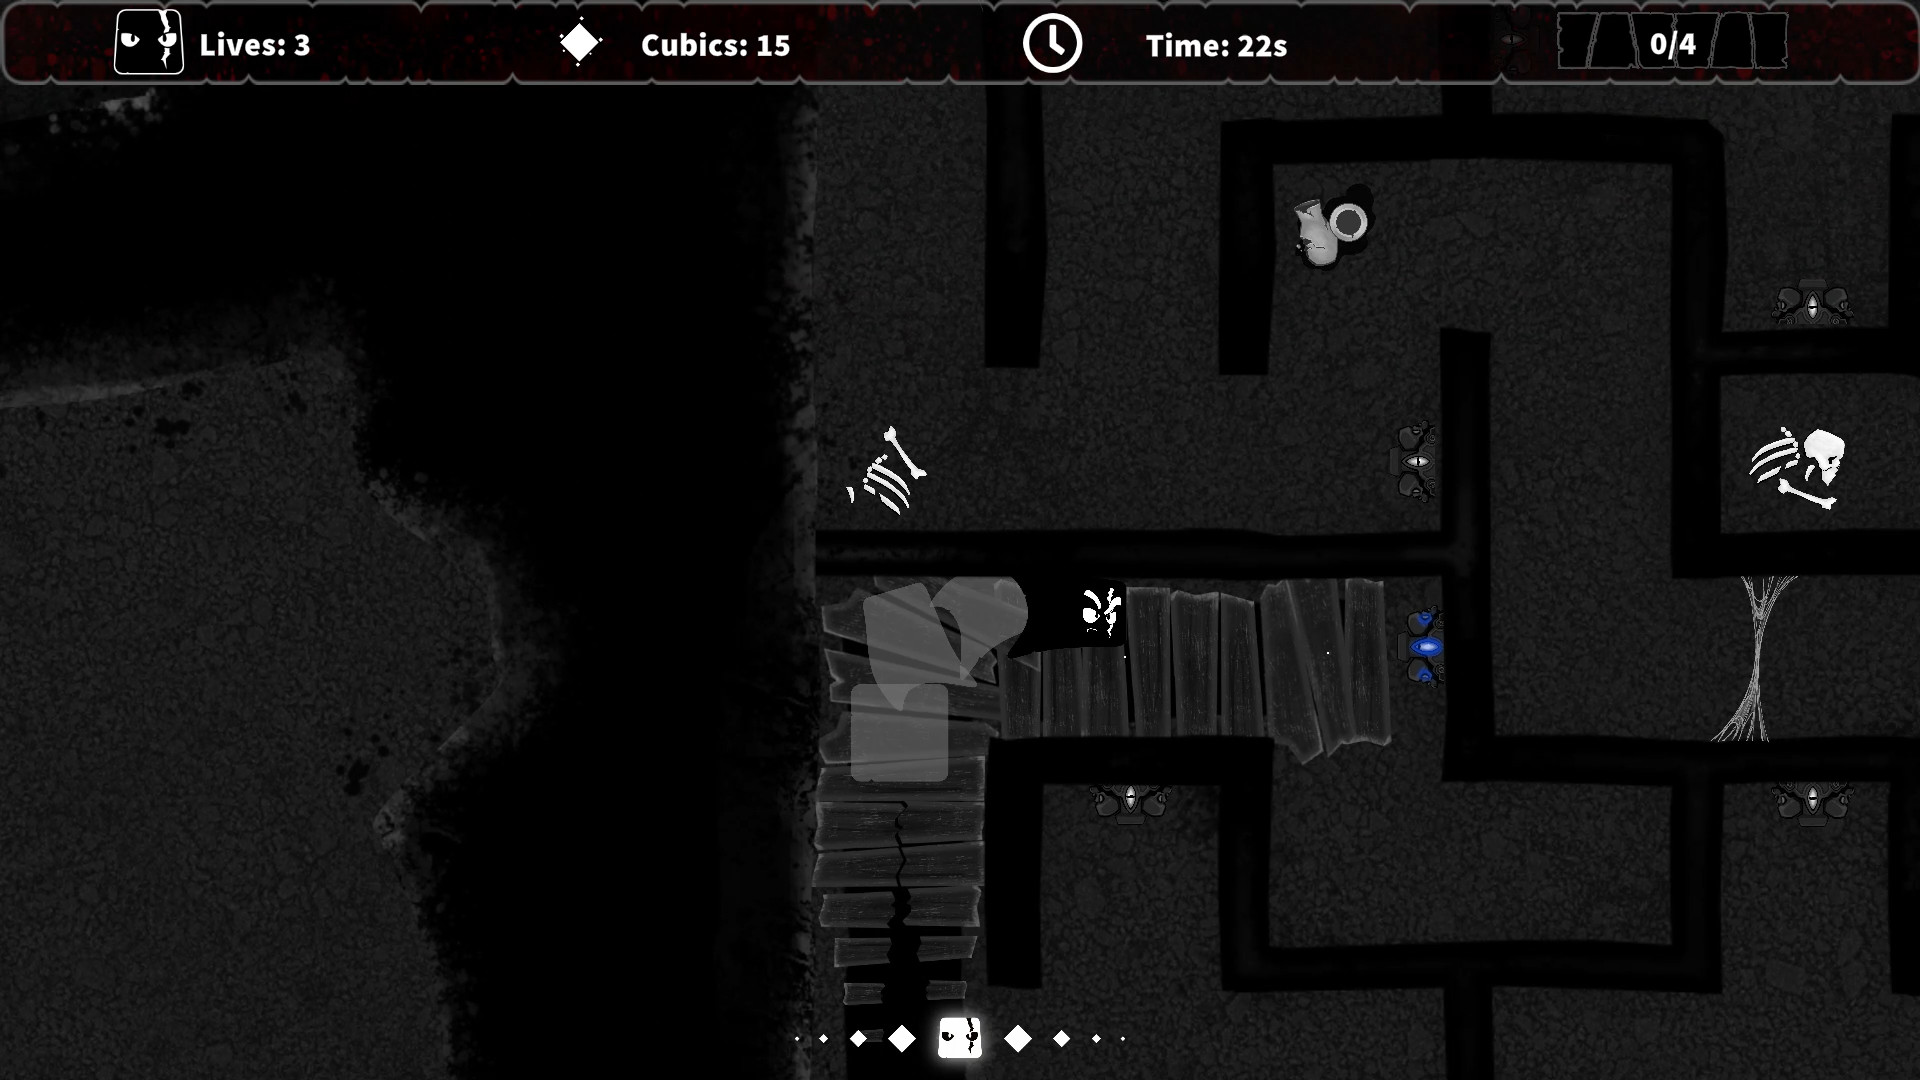 Darkness Maze Cube - Hardcore Puzzle Game Steam CD Key 1.46 USD